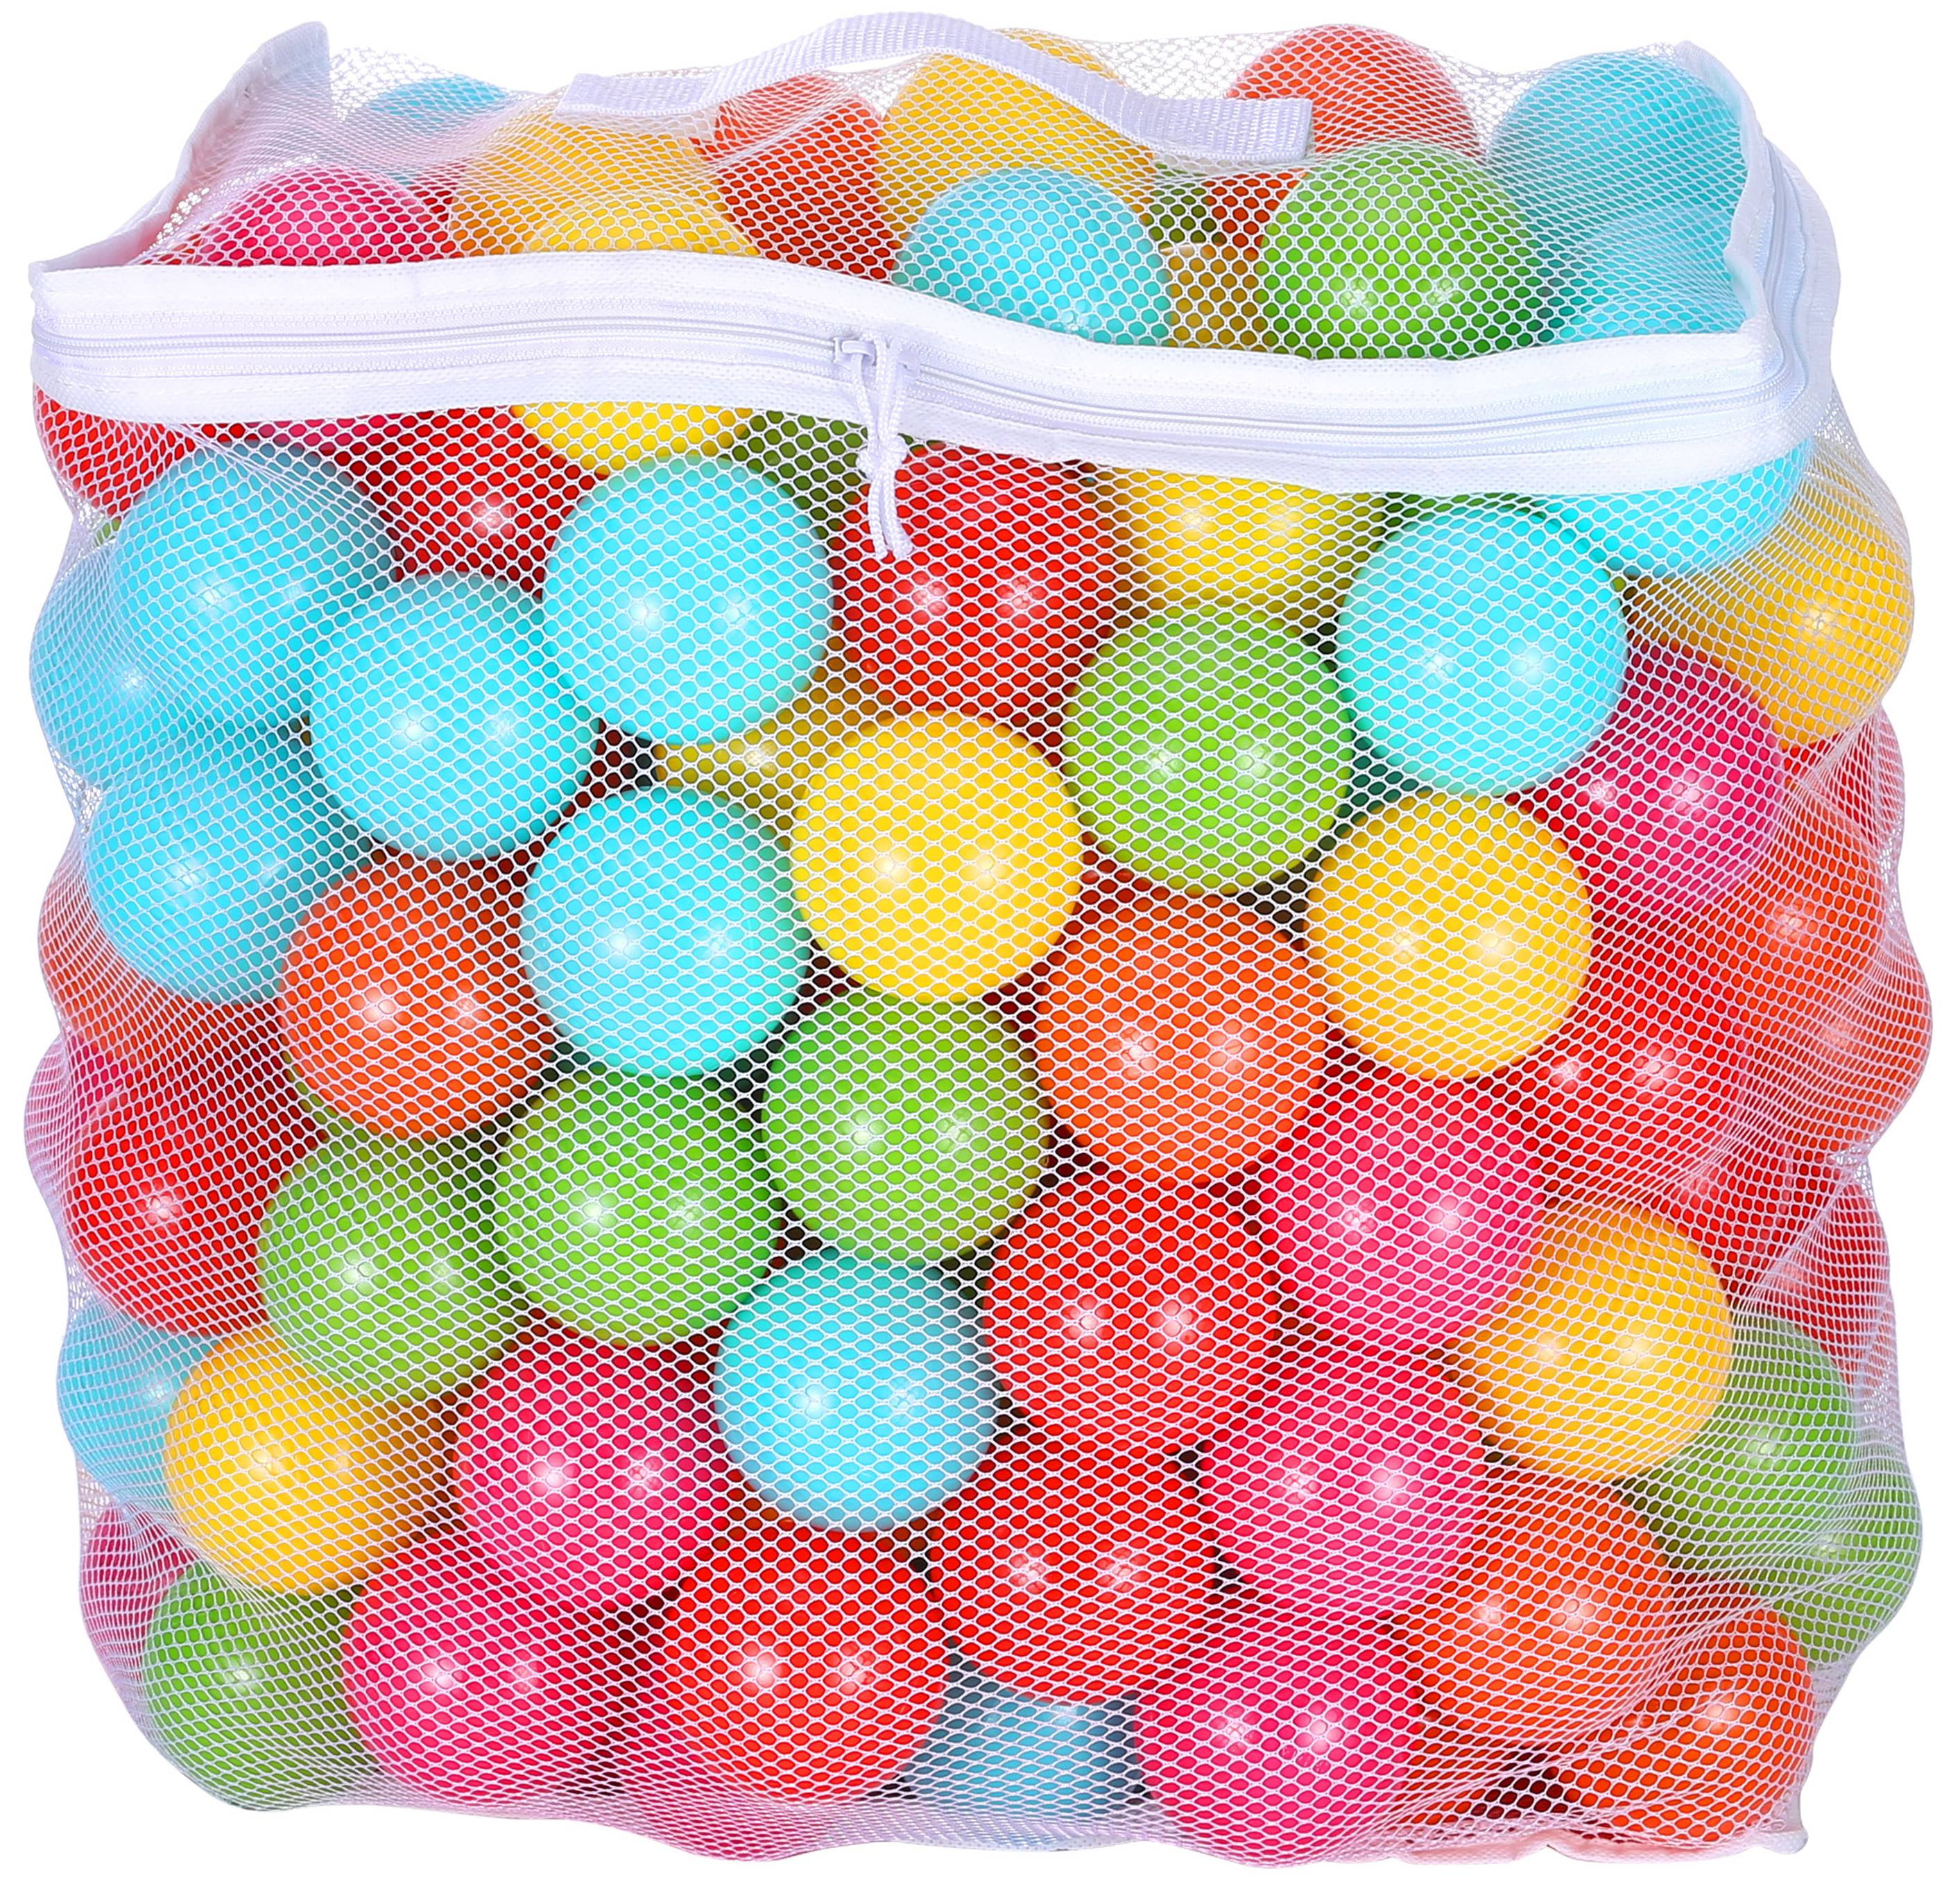 Click N' Play Value Pack 1000 BPA Free Crush Proof Plastic Ball 6 Bright Colors